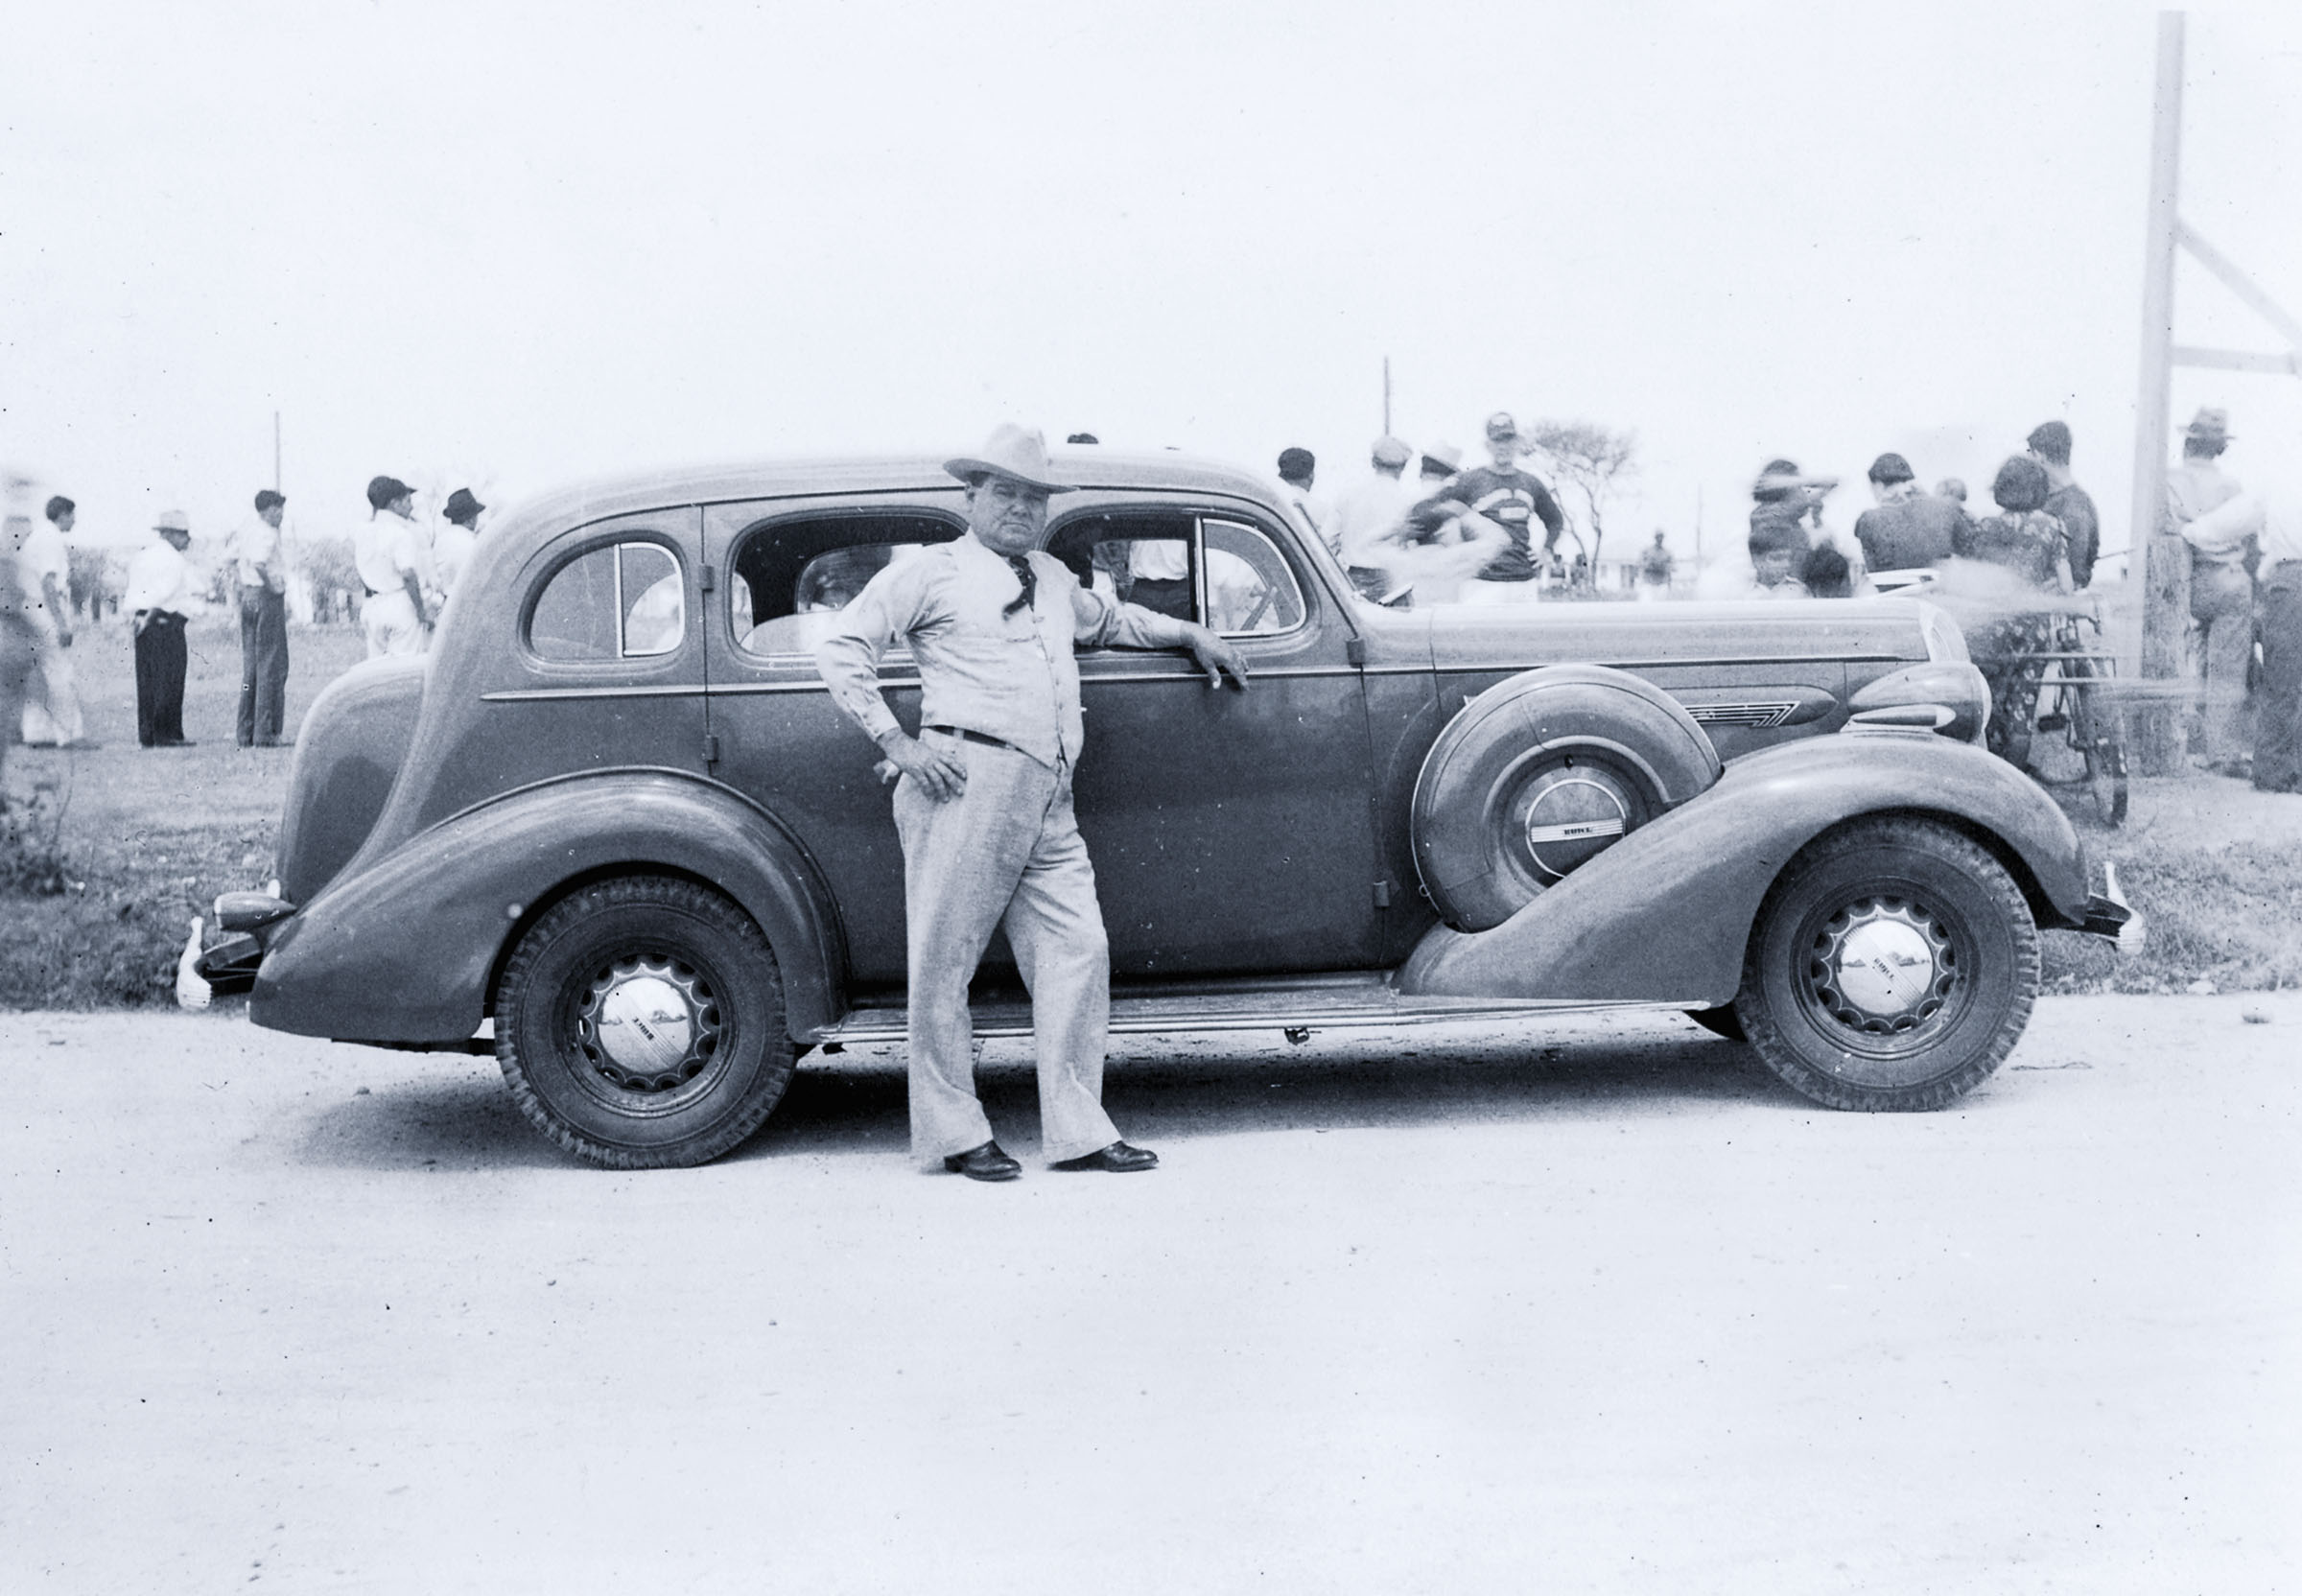 A man in a short cowboy hat, shirt and tie leans his arm against the passenger door of a Buick Roadster